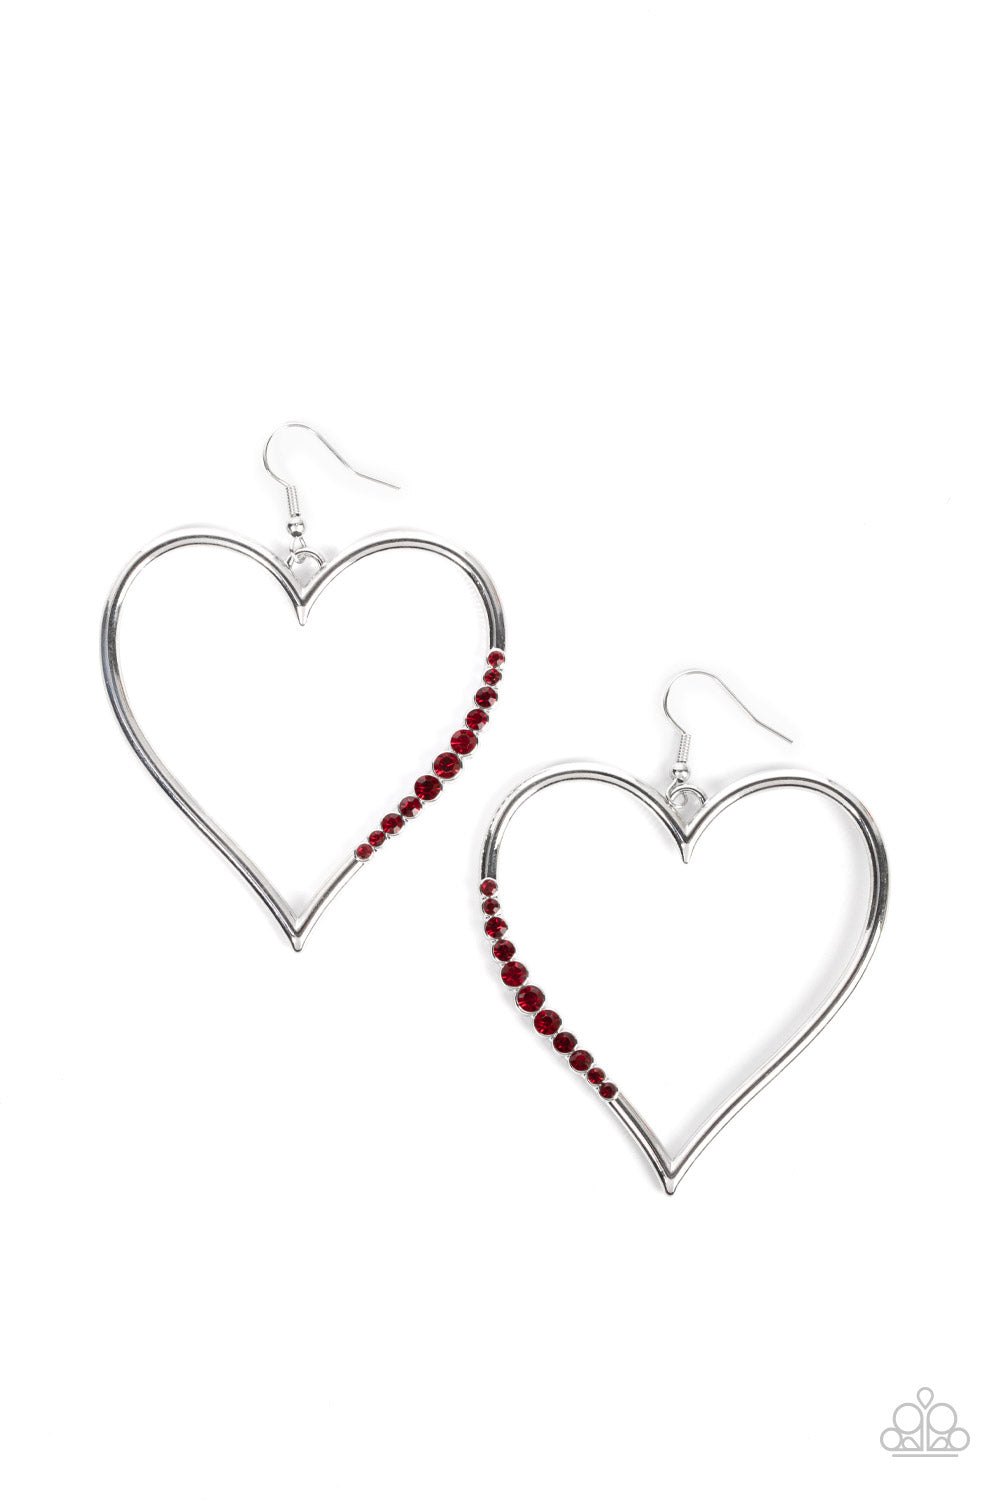 Bewitched Kiss Earrings__Red